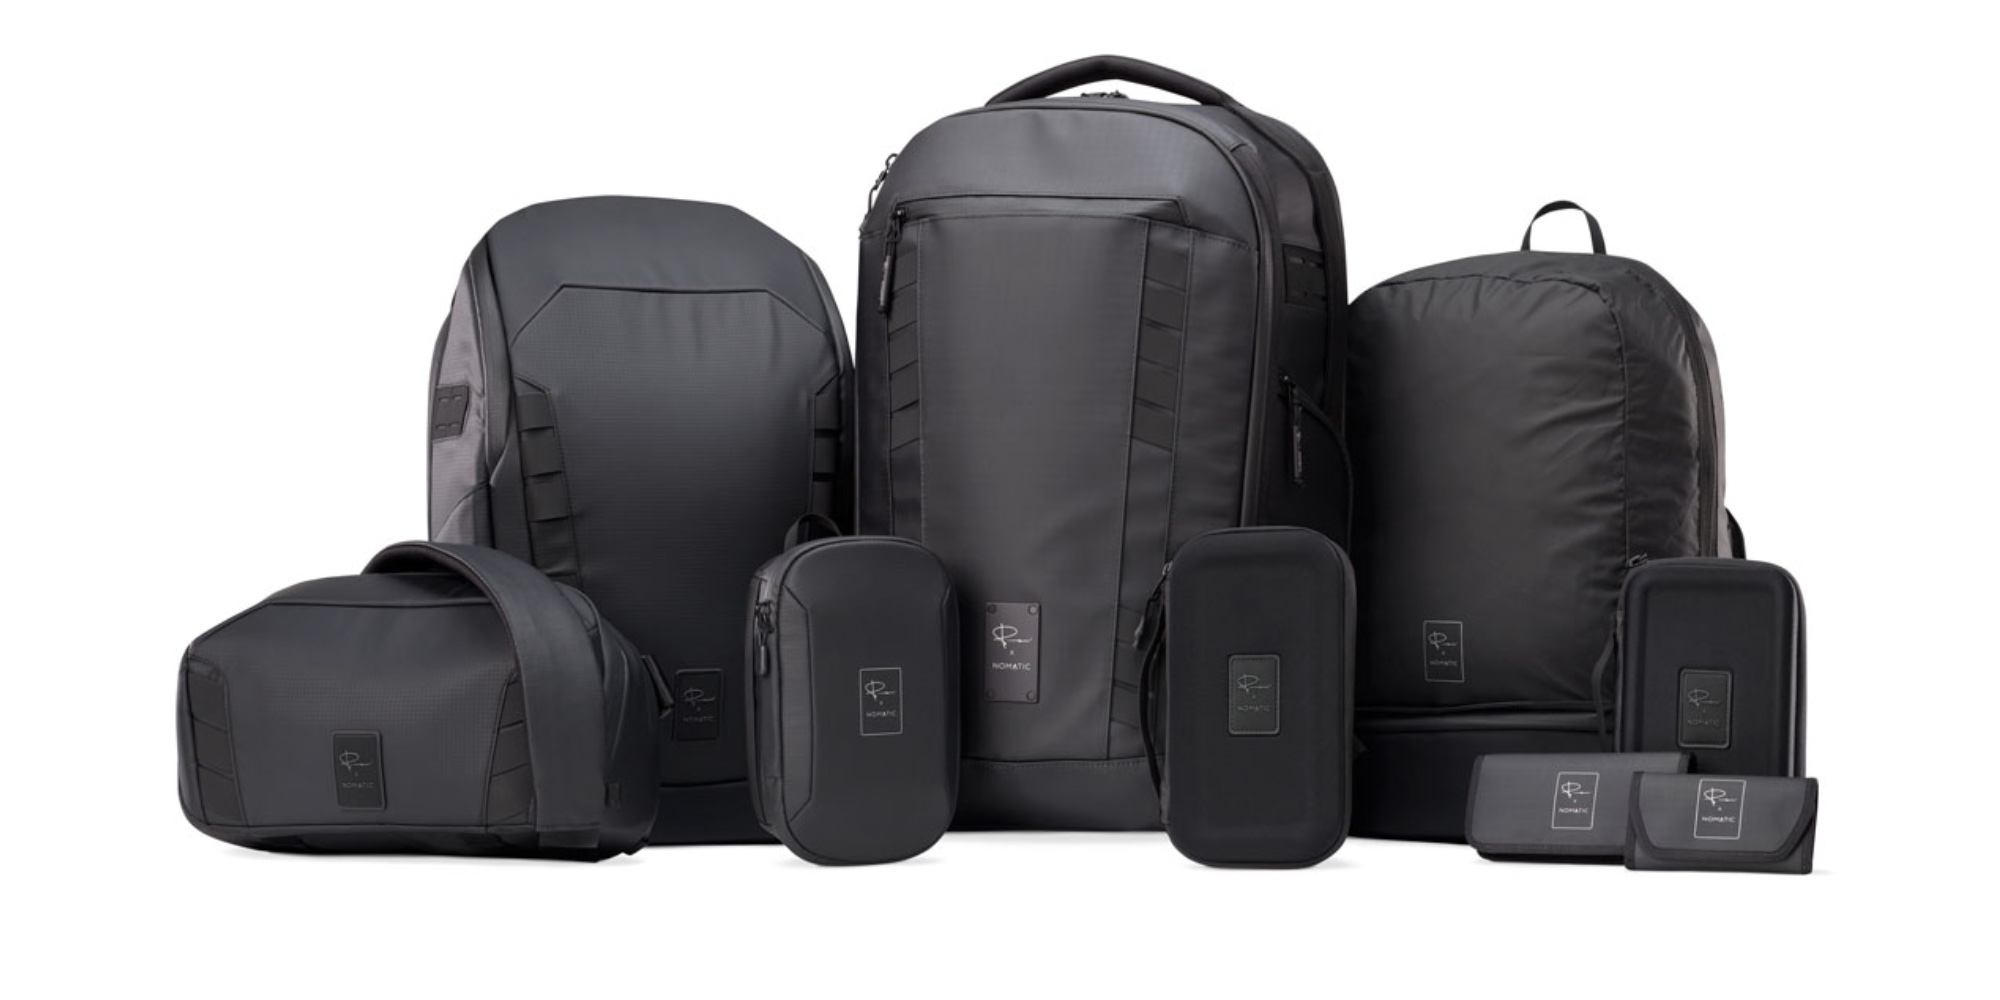 NOMATIC Peter McKinnon camera bags are great for traveling - 9to5Toys